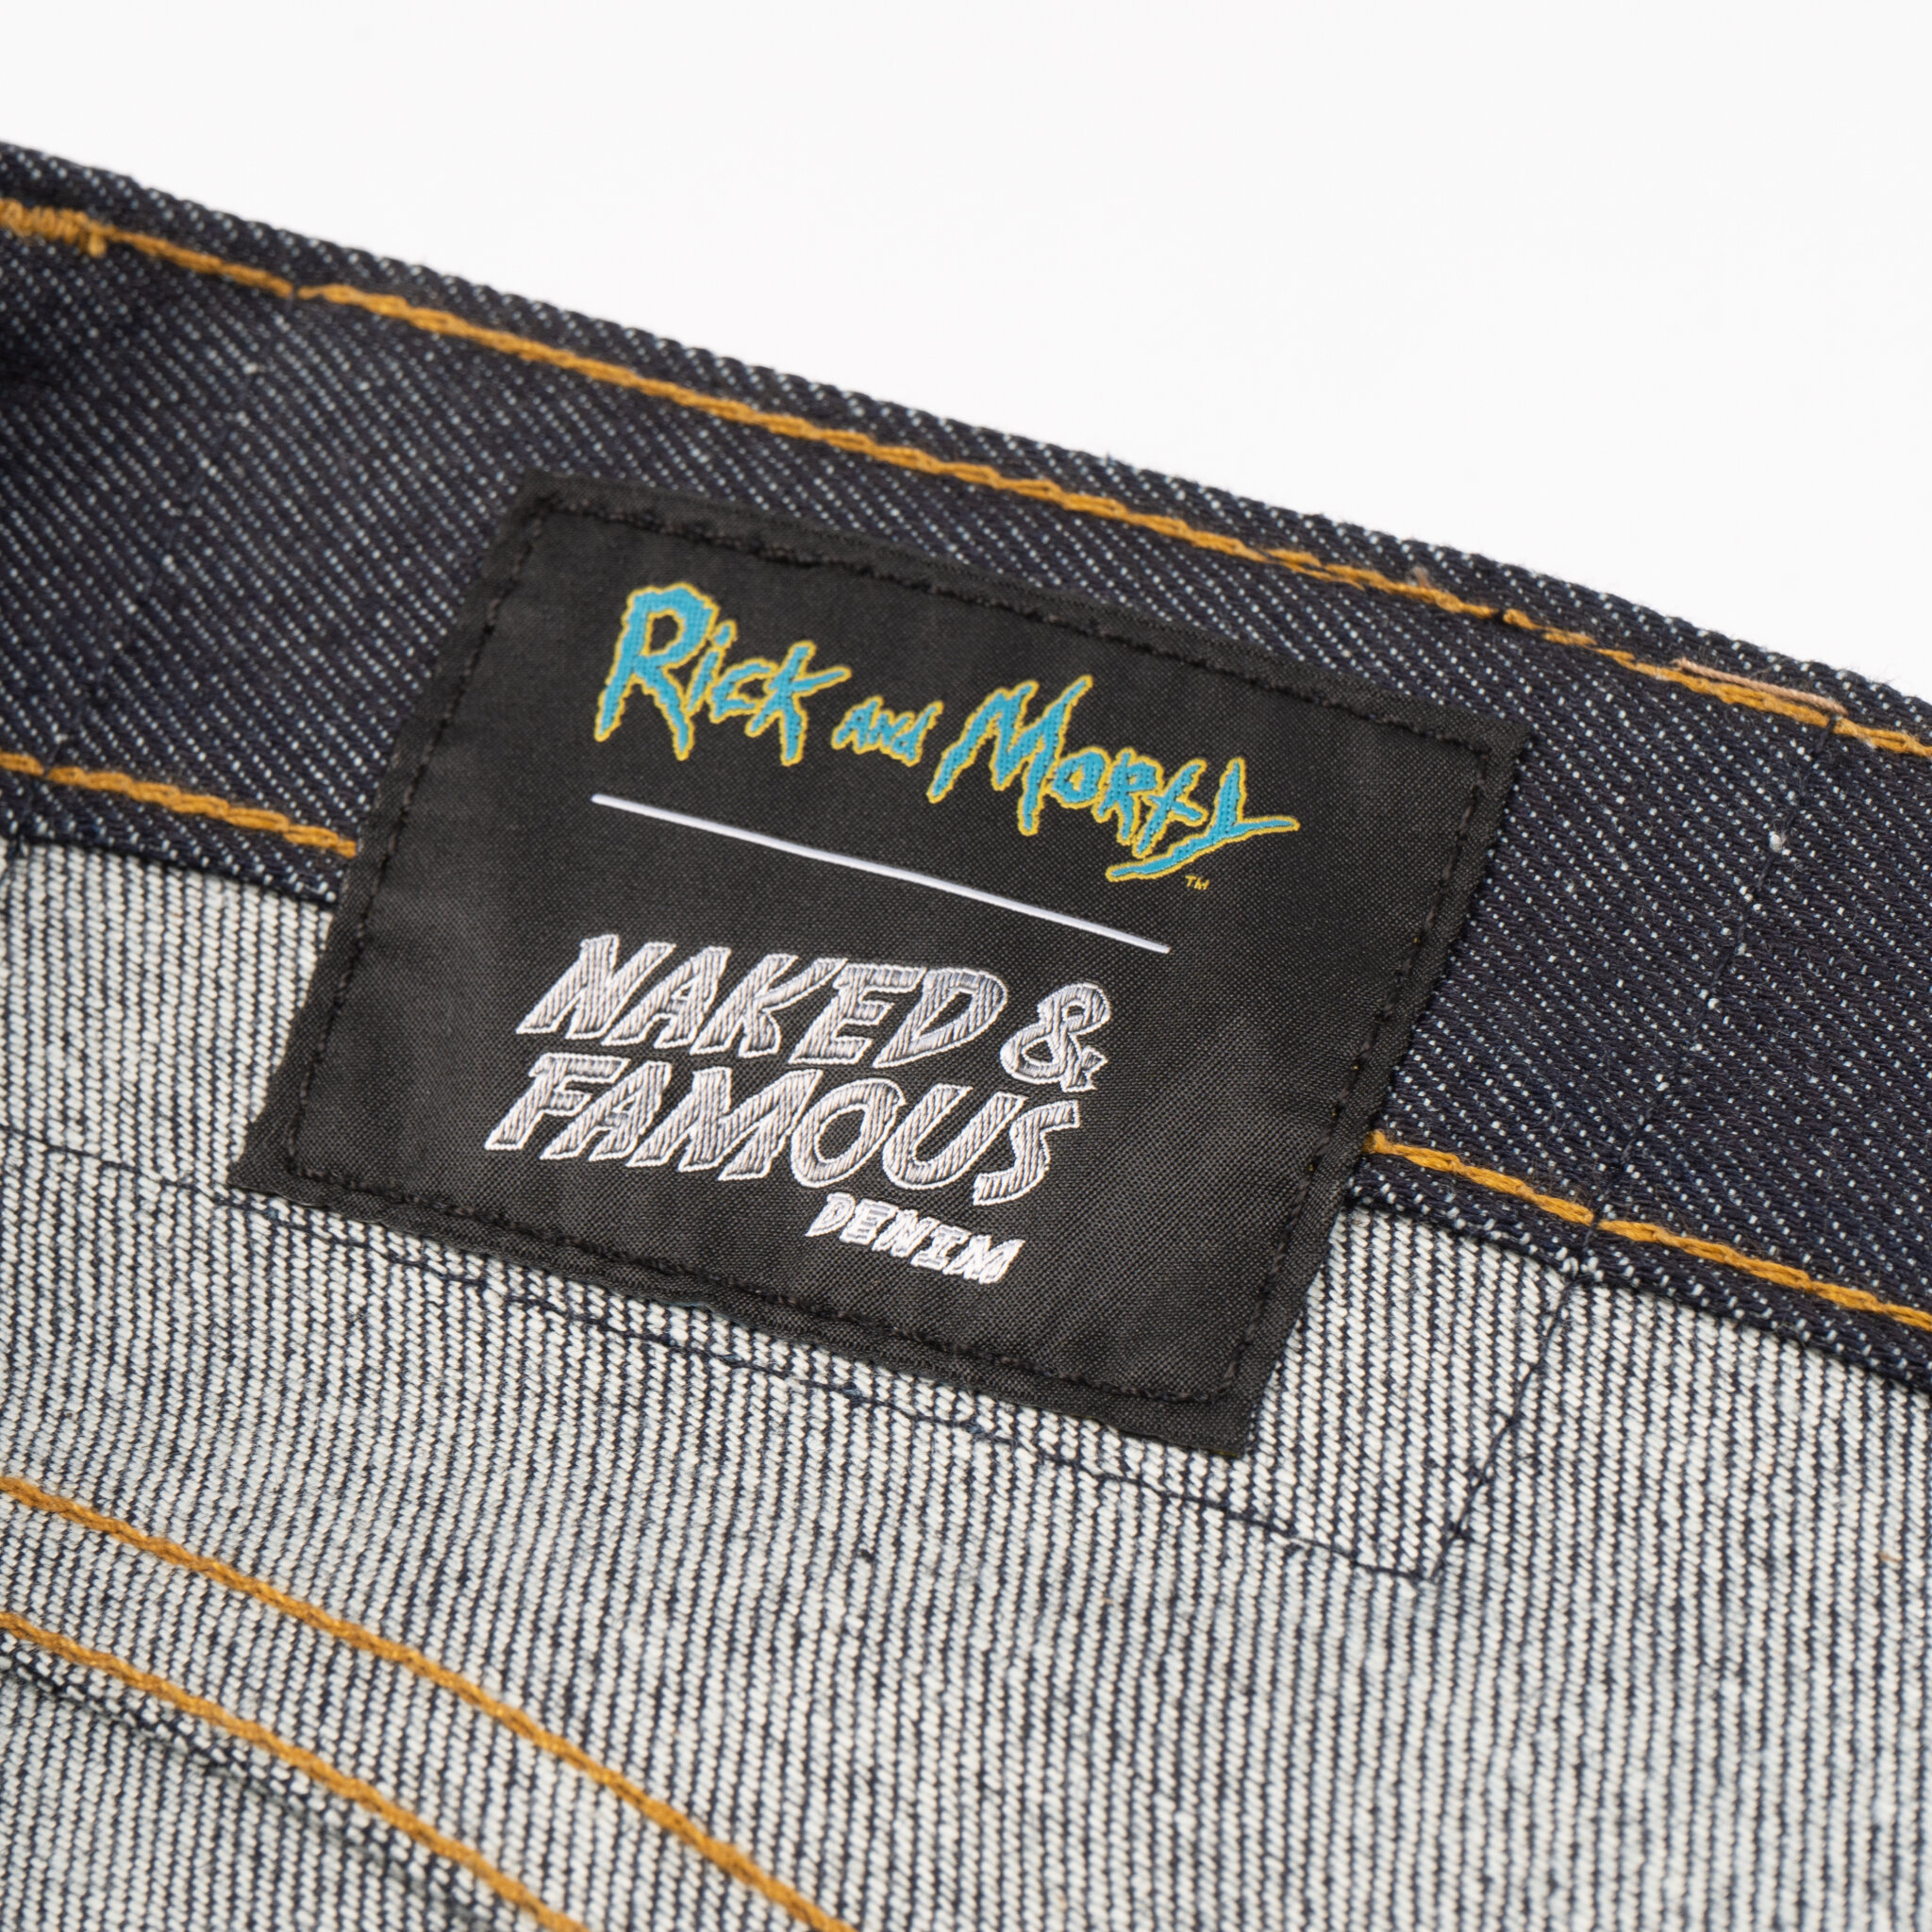  Morty Smith “Aww Geez” Selvedge jeans - dual branded label 